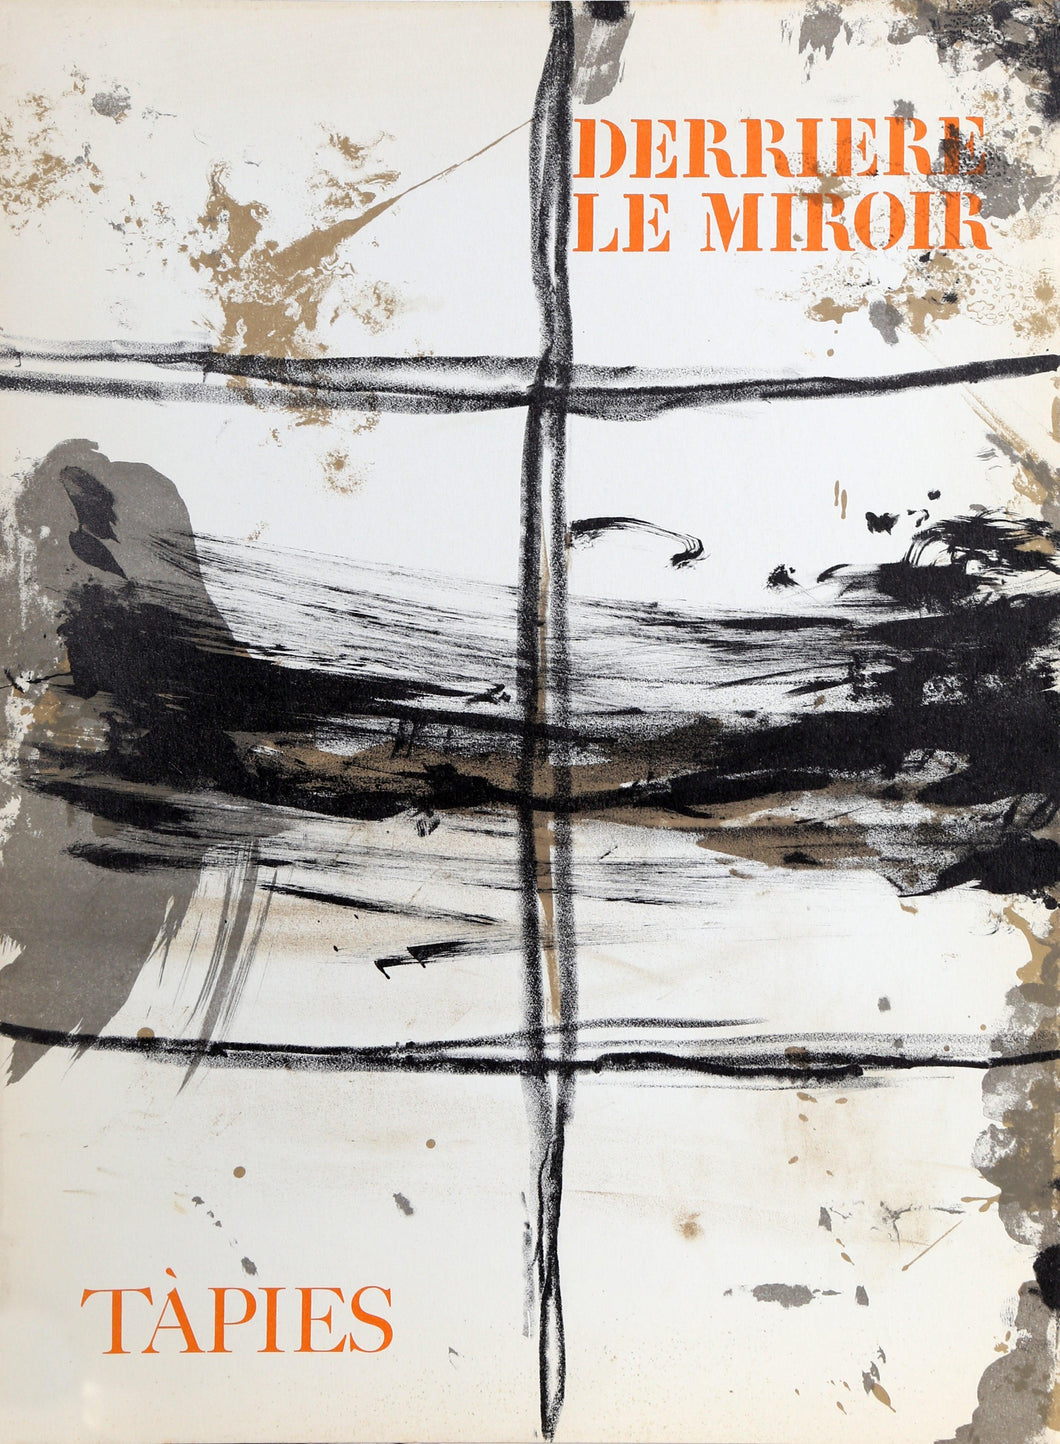 Abstract (Cover) from Derriere Le Miroir #168 Lithograph | Alexander Calder,{{product.type}}